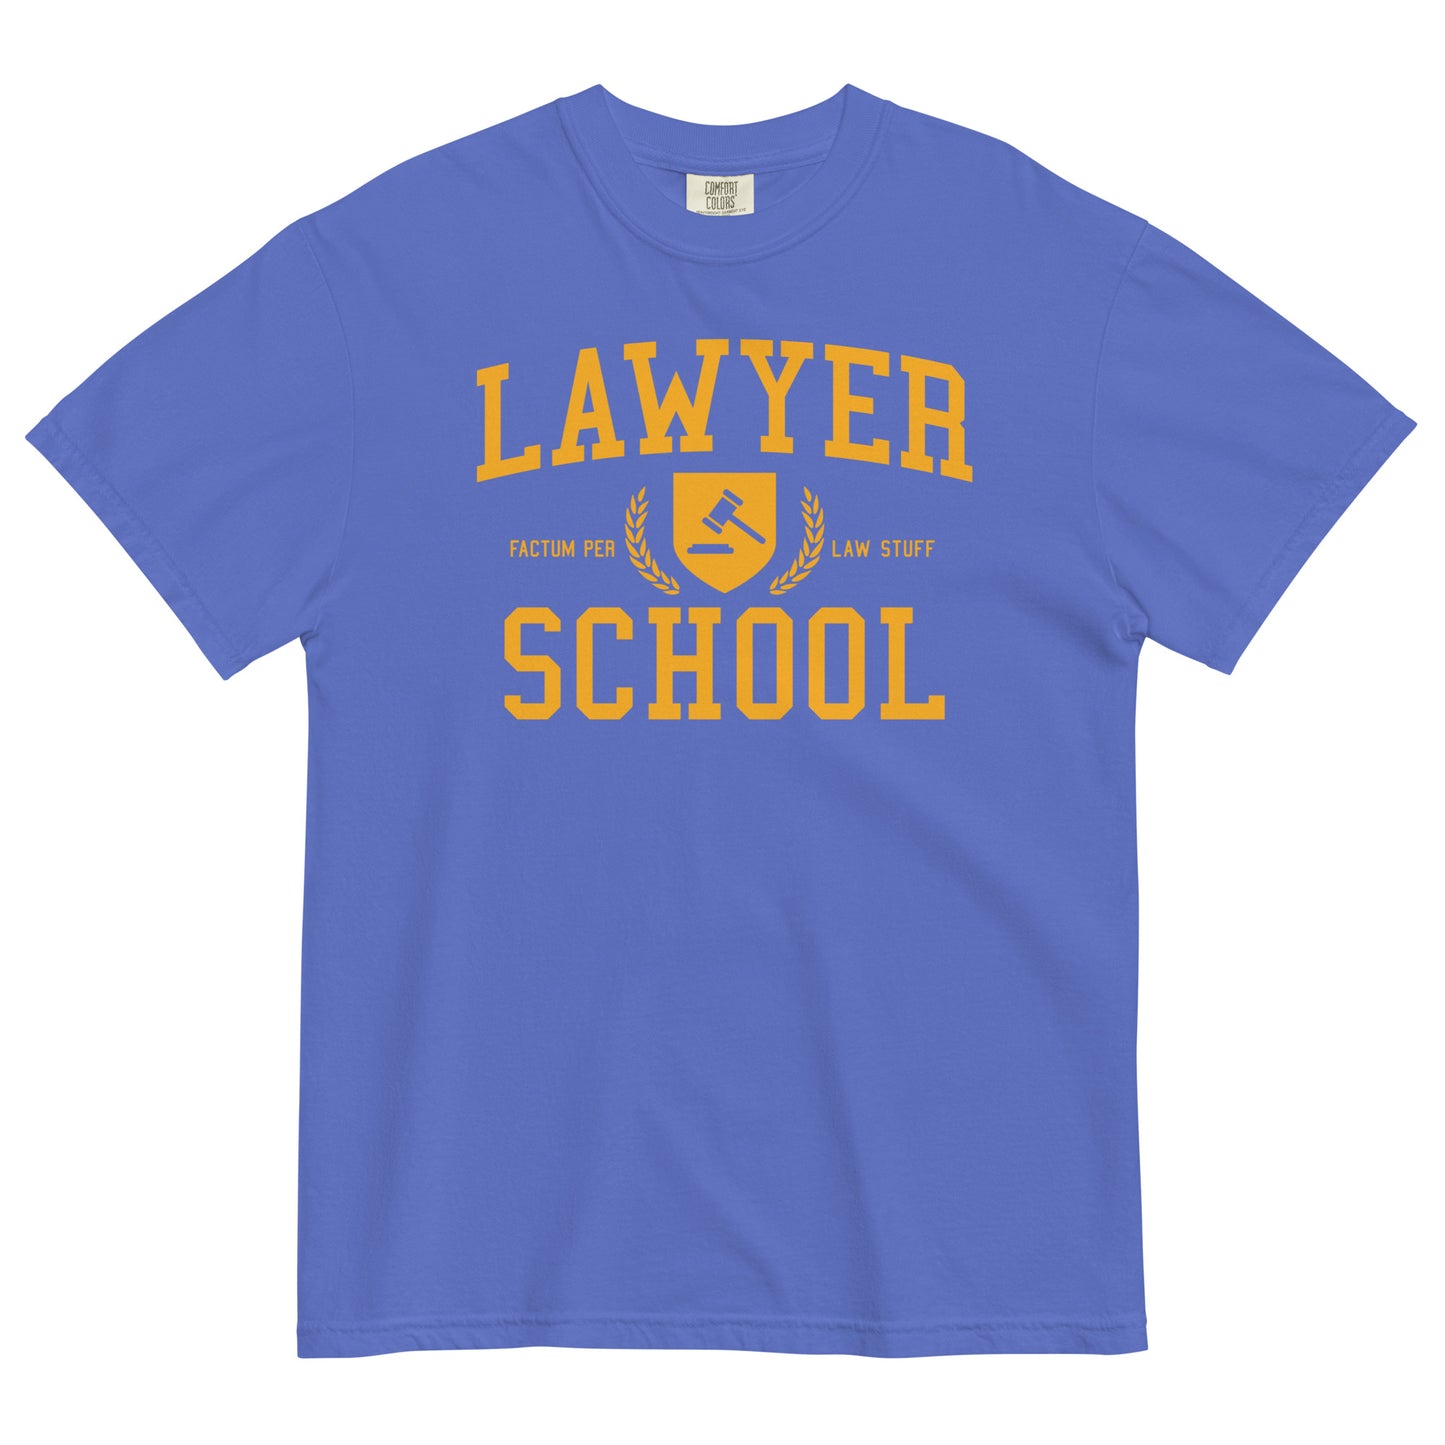 Lawyer School Men's Relaxed Fit Tee